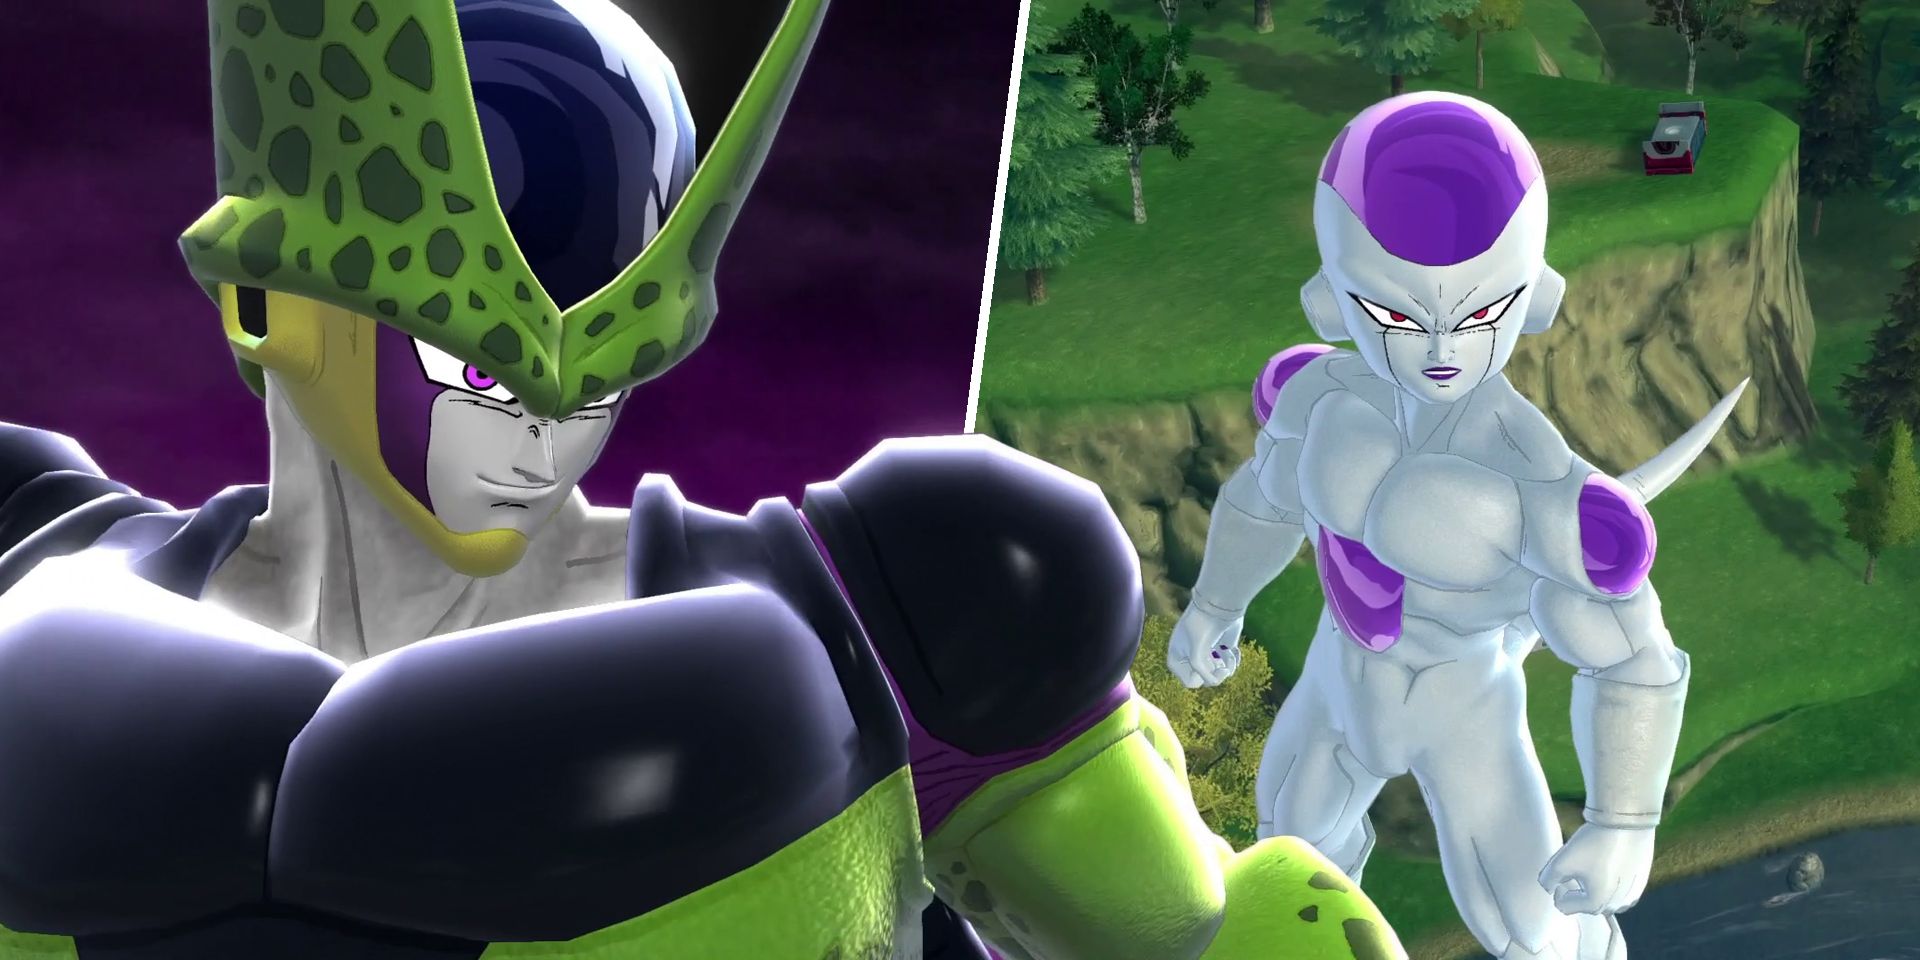 Cell and Frieza from Dragon Ball